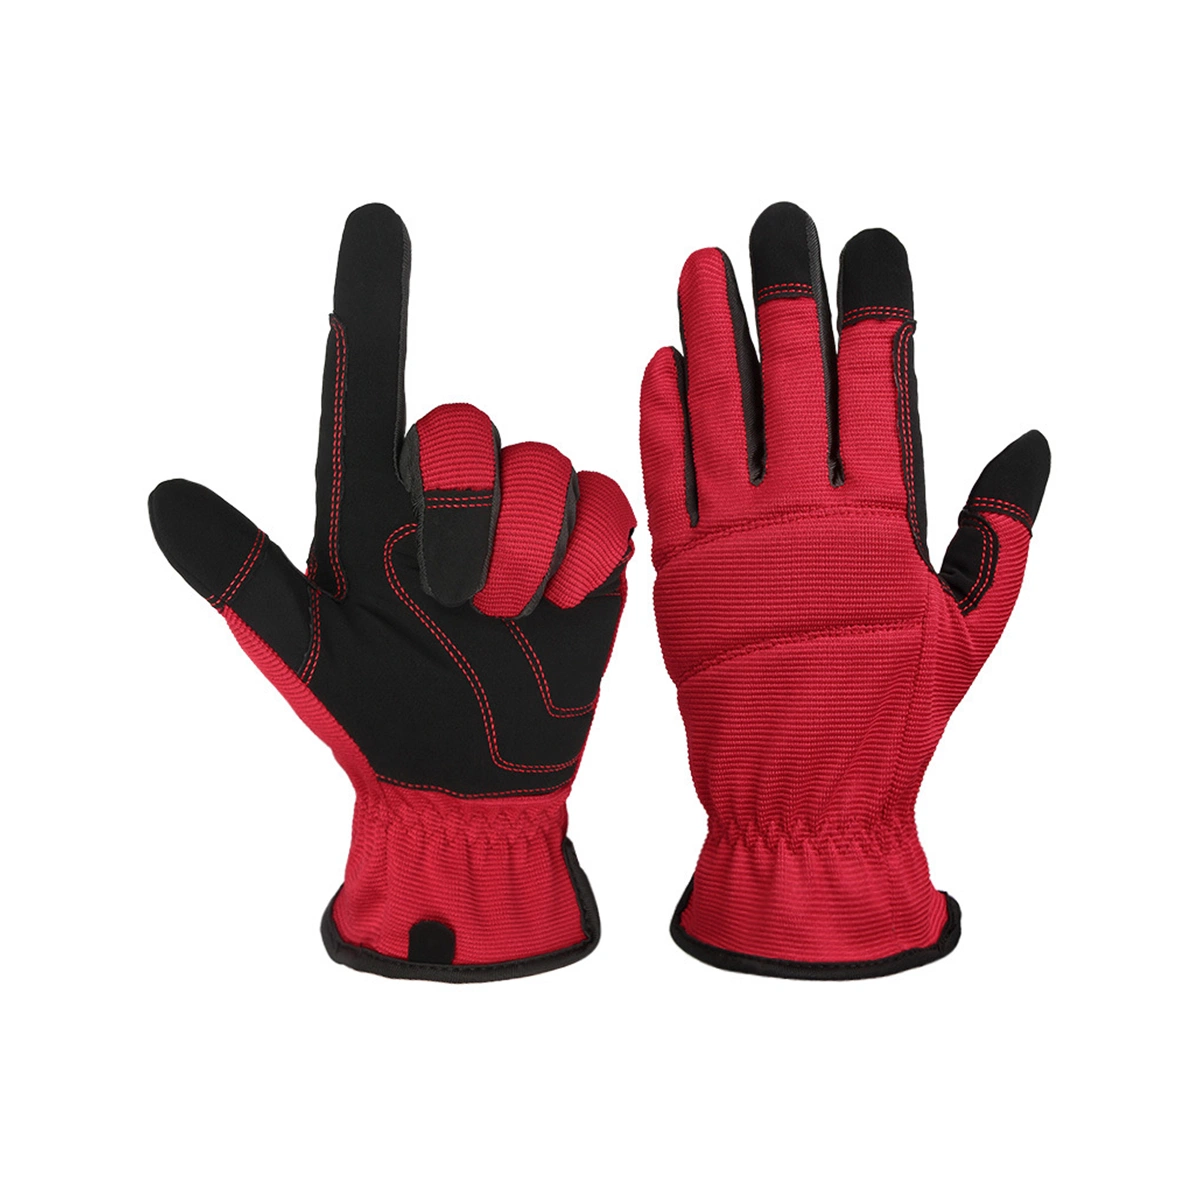 Wholesale Imitation Microfiber Impact Safety Gloves for Protective Work in Various Industries